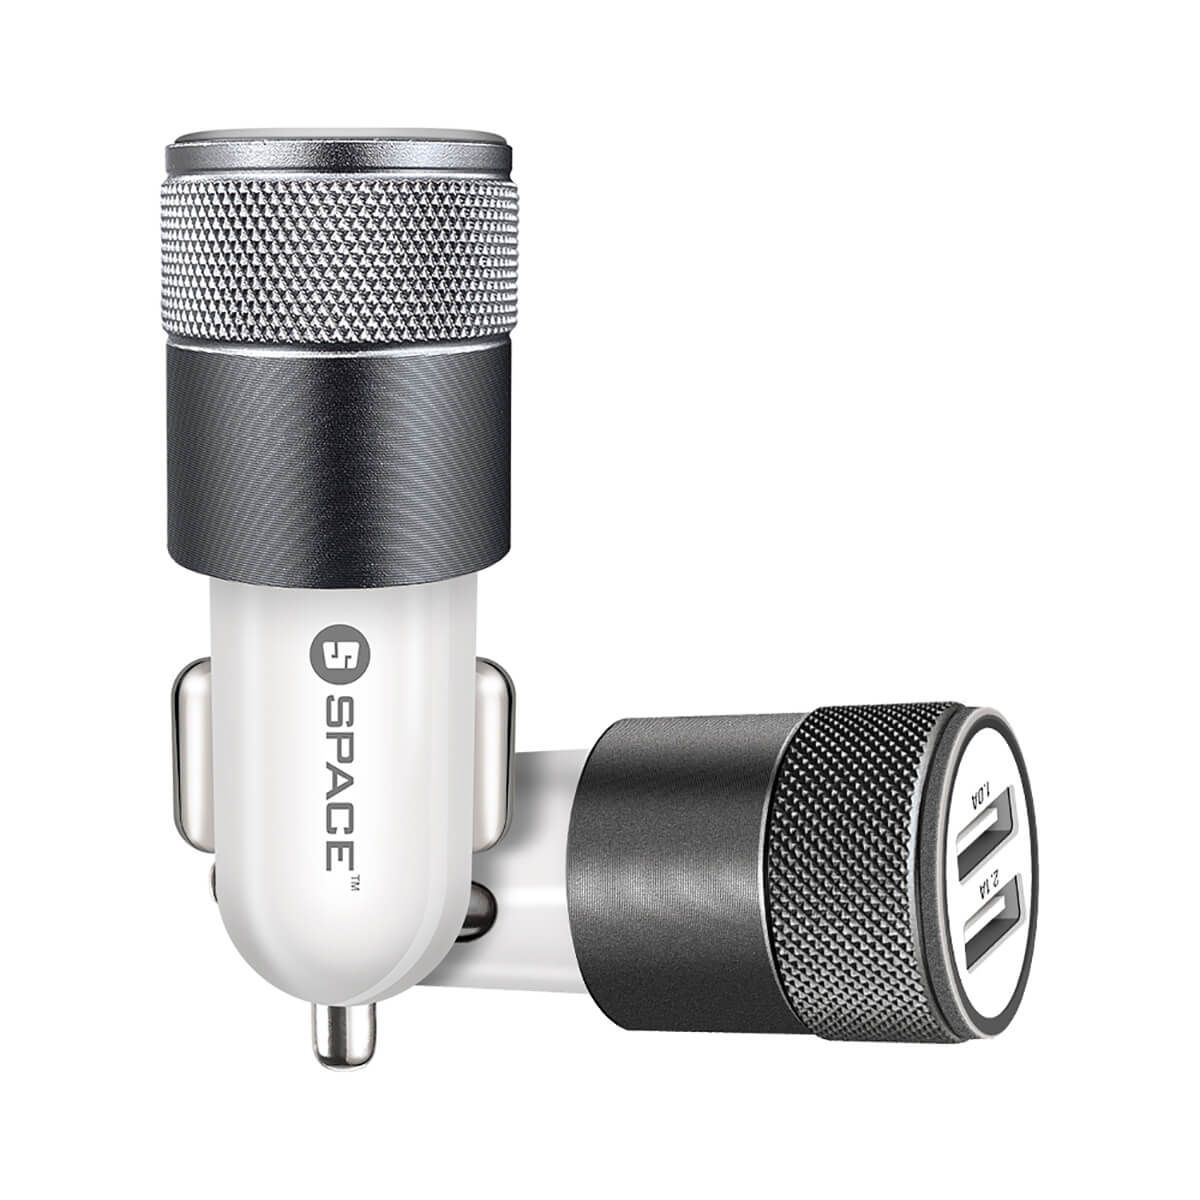 Space CC-160 Dual Port USB 2.1A Car Charger Price in Pakistan